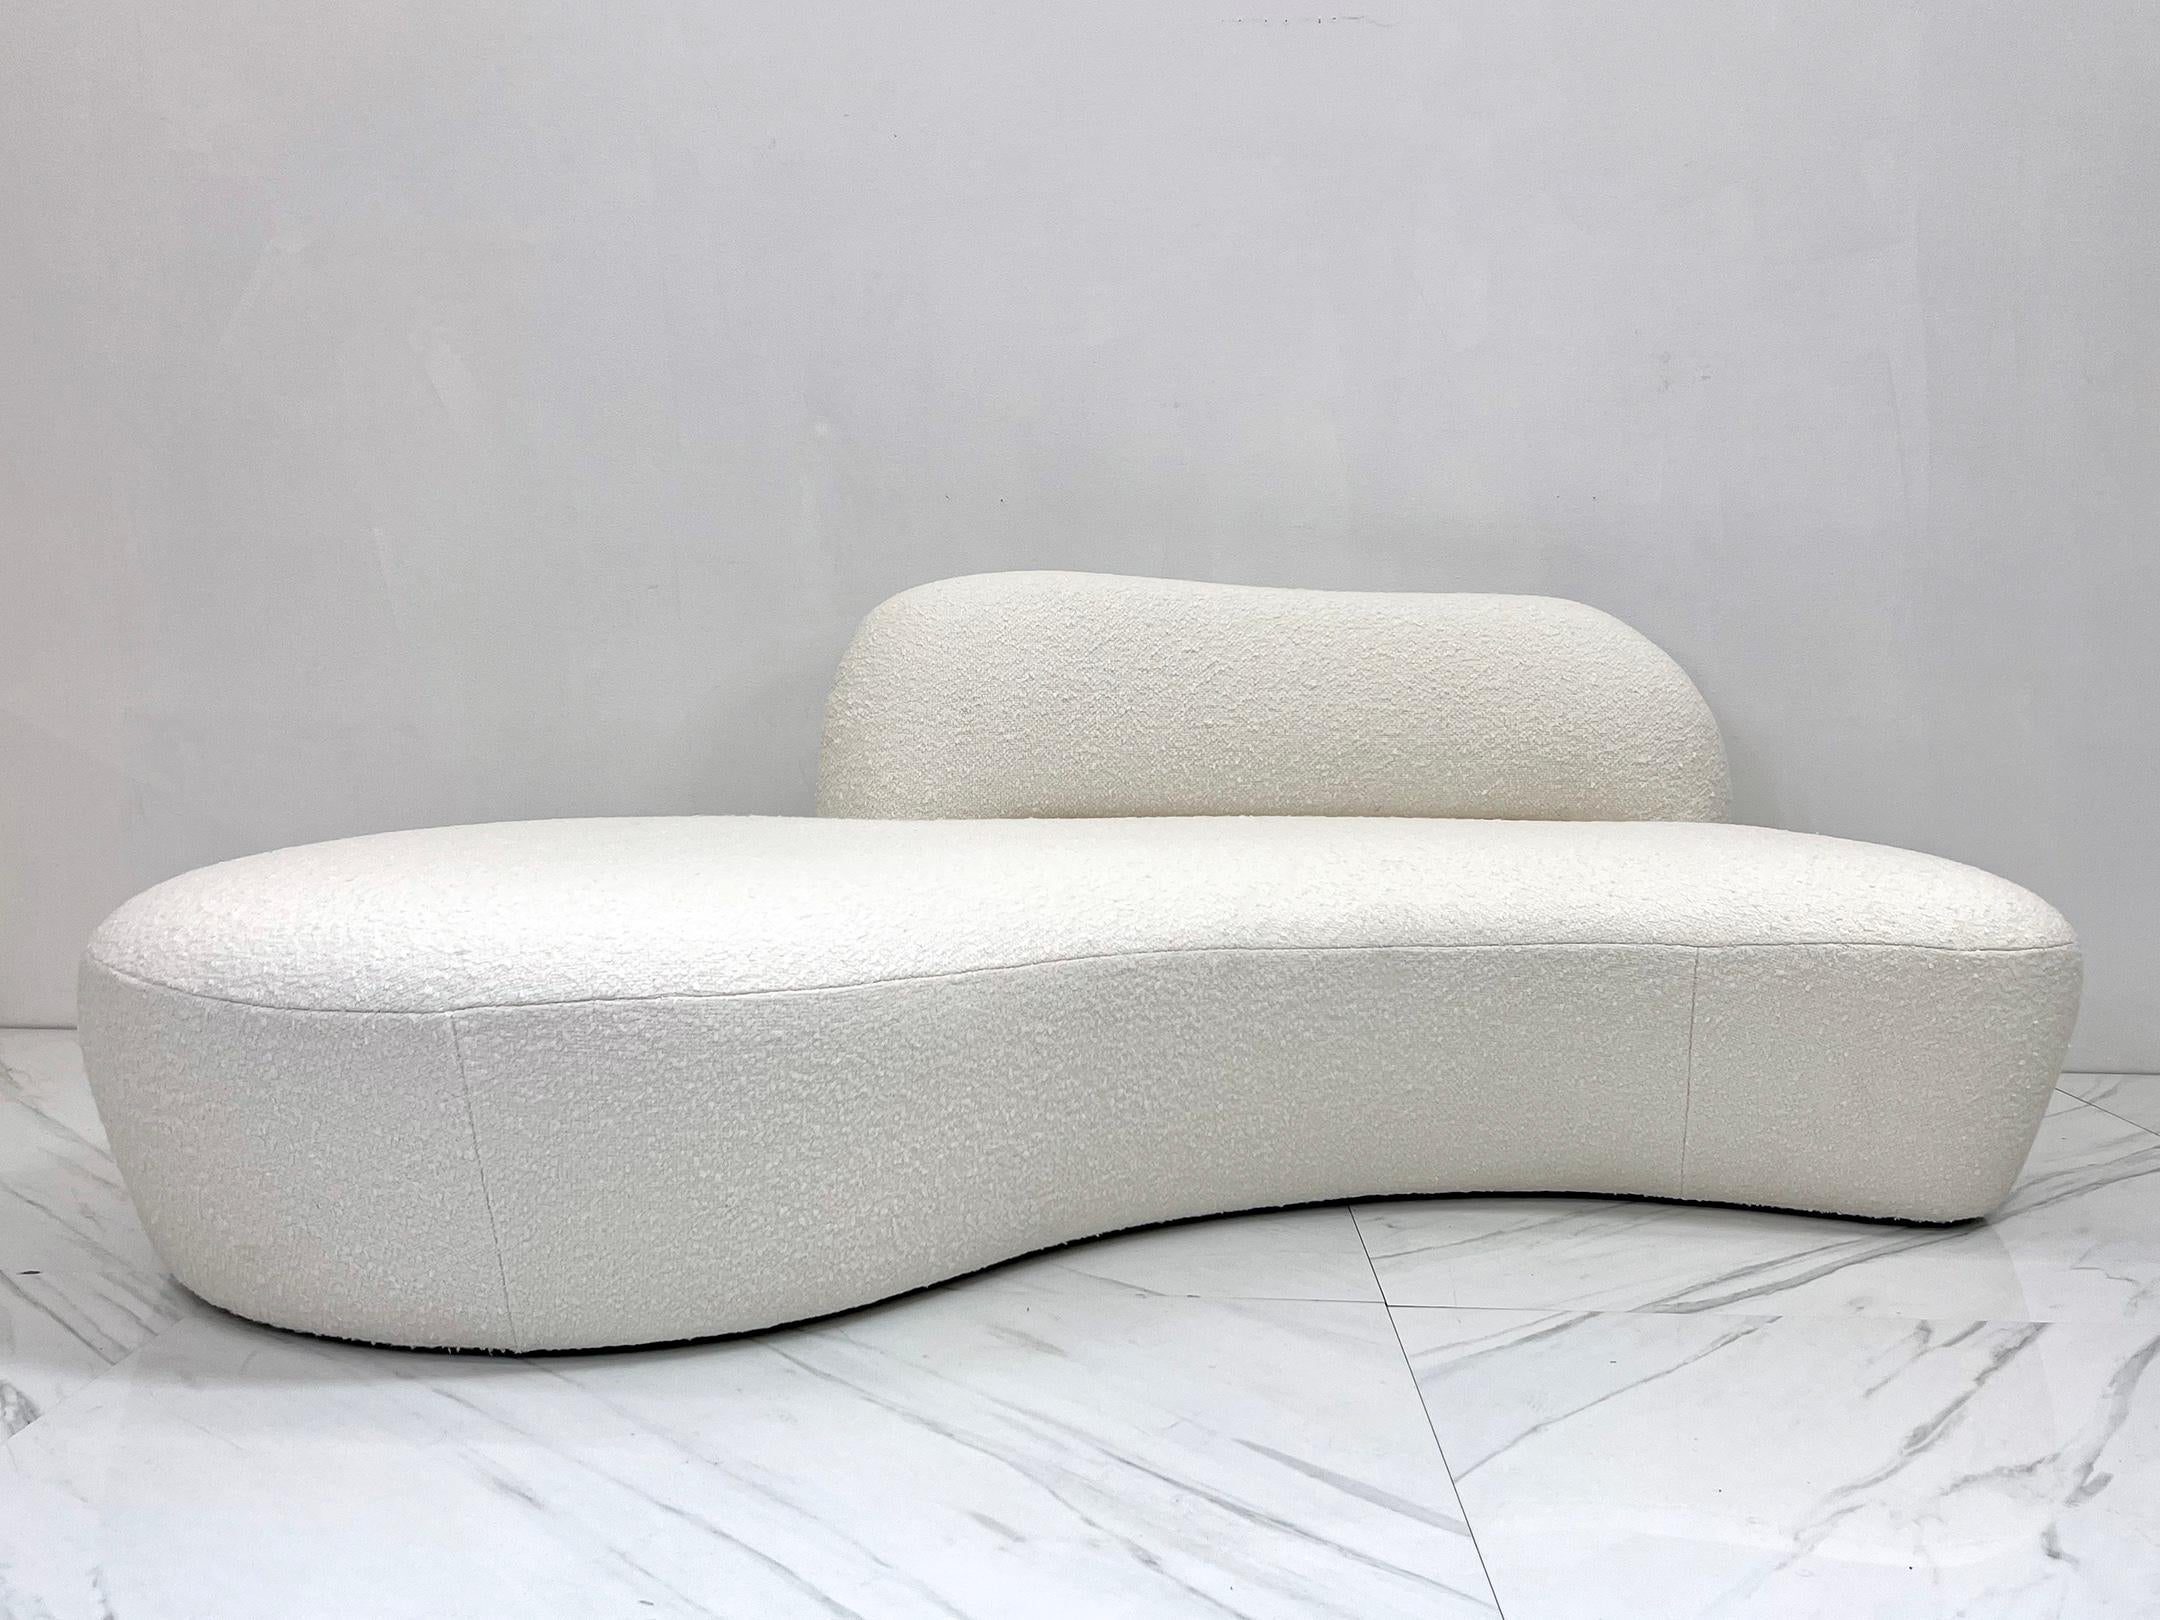 Contemporary Vladimir Kagan Curved Zoe Sofa in White Boucle for American Leather, Signed